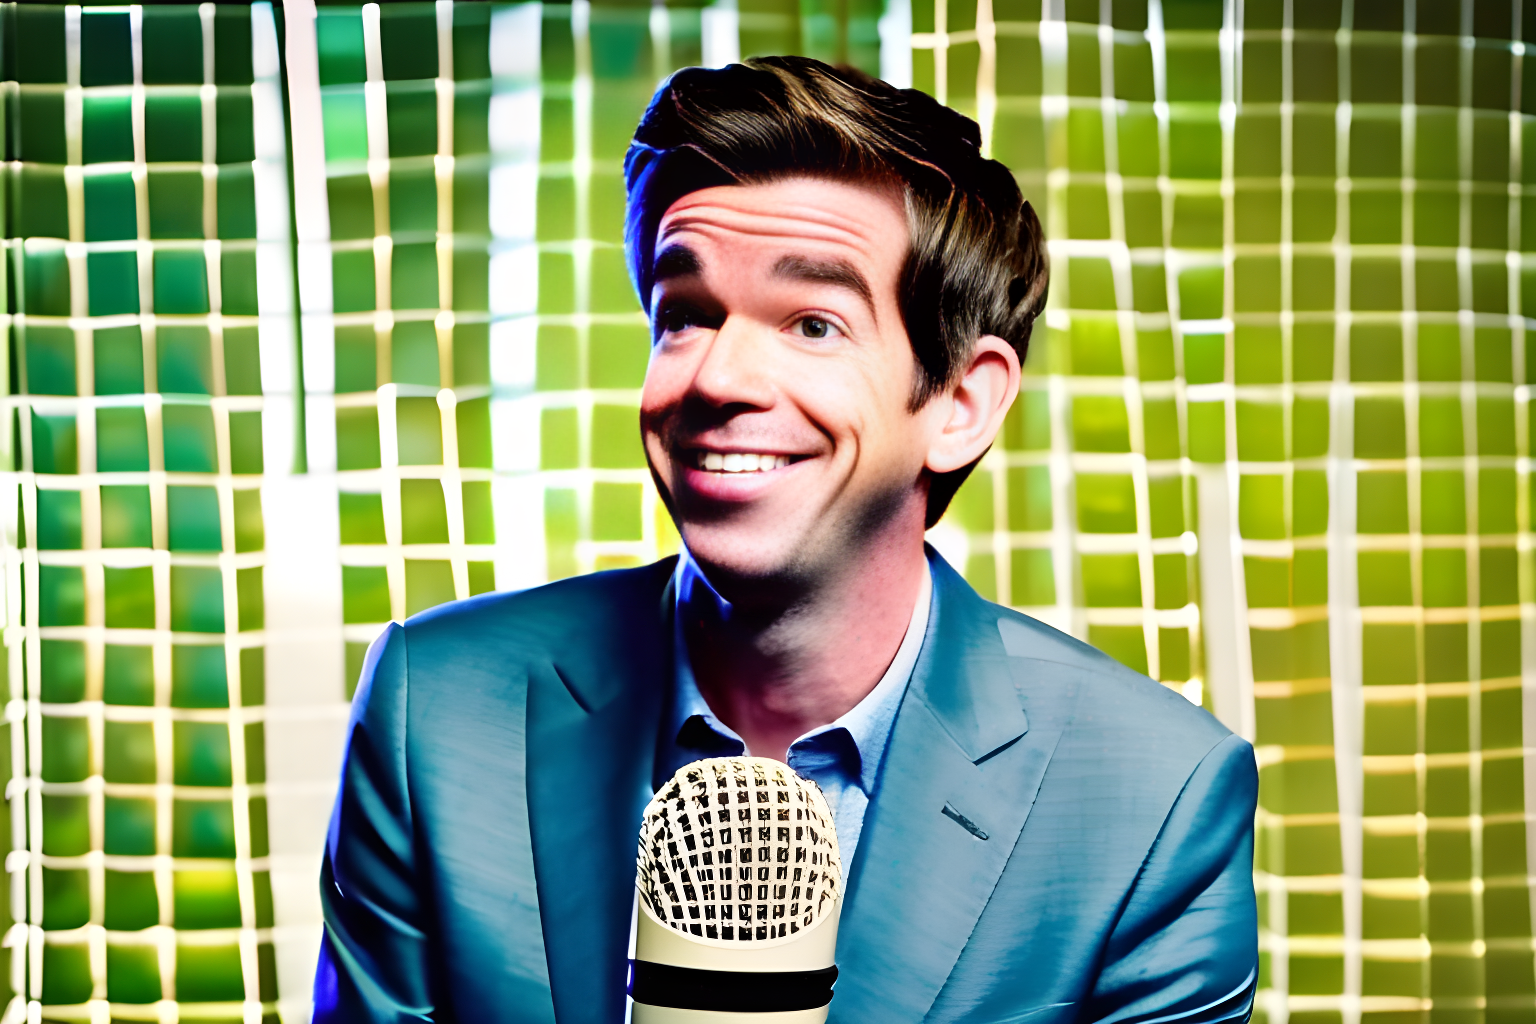 The Role of Pathos, Logos, and Ethos in Business Storytelling... and John Mulaney